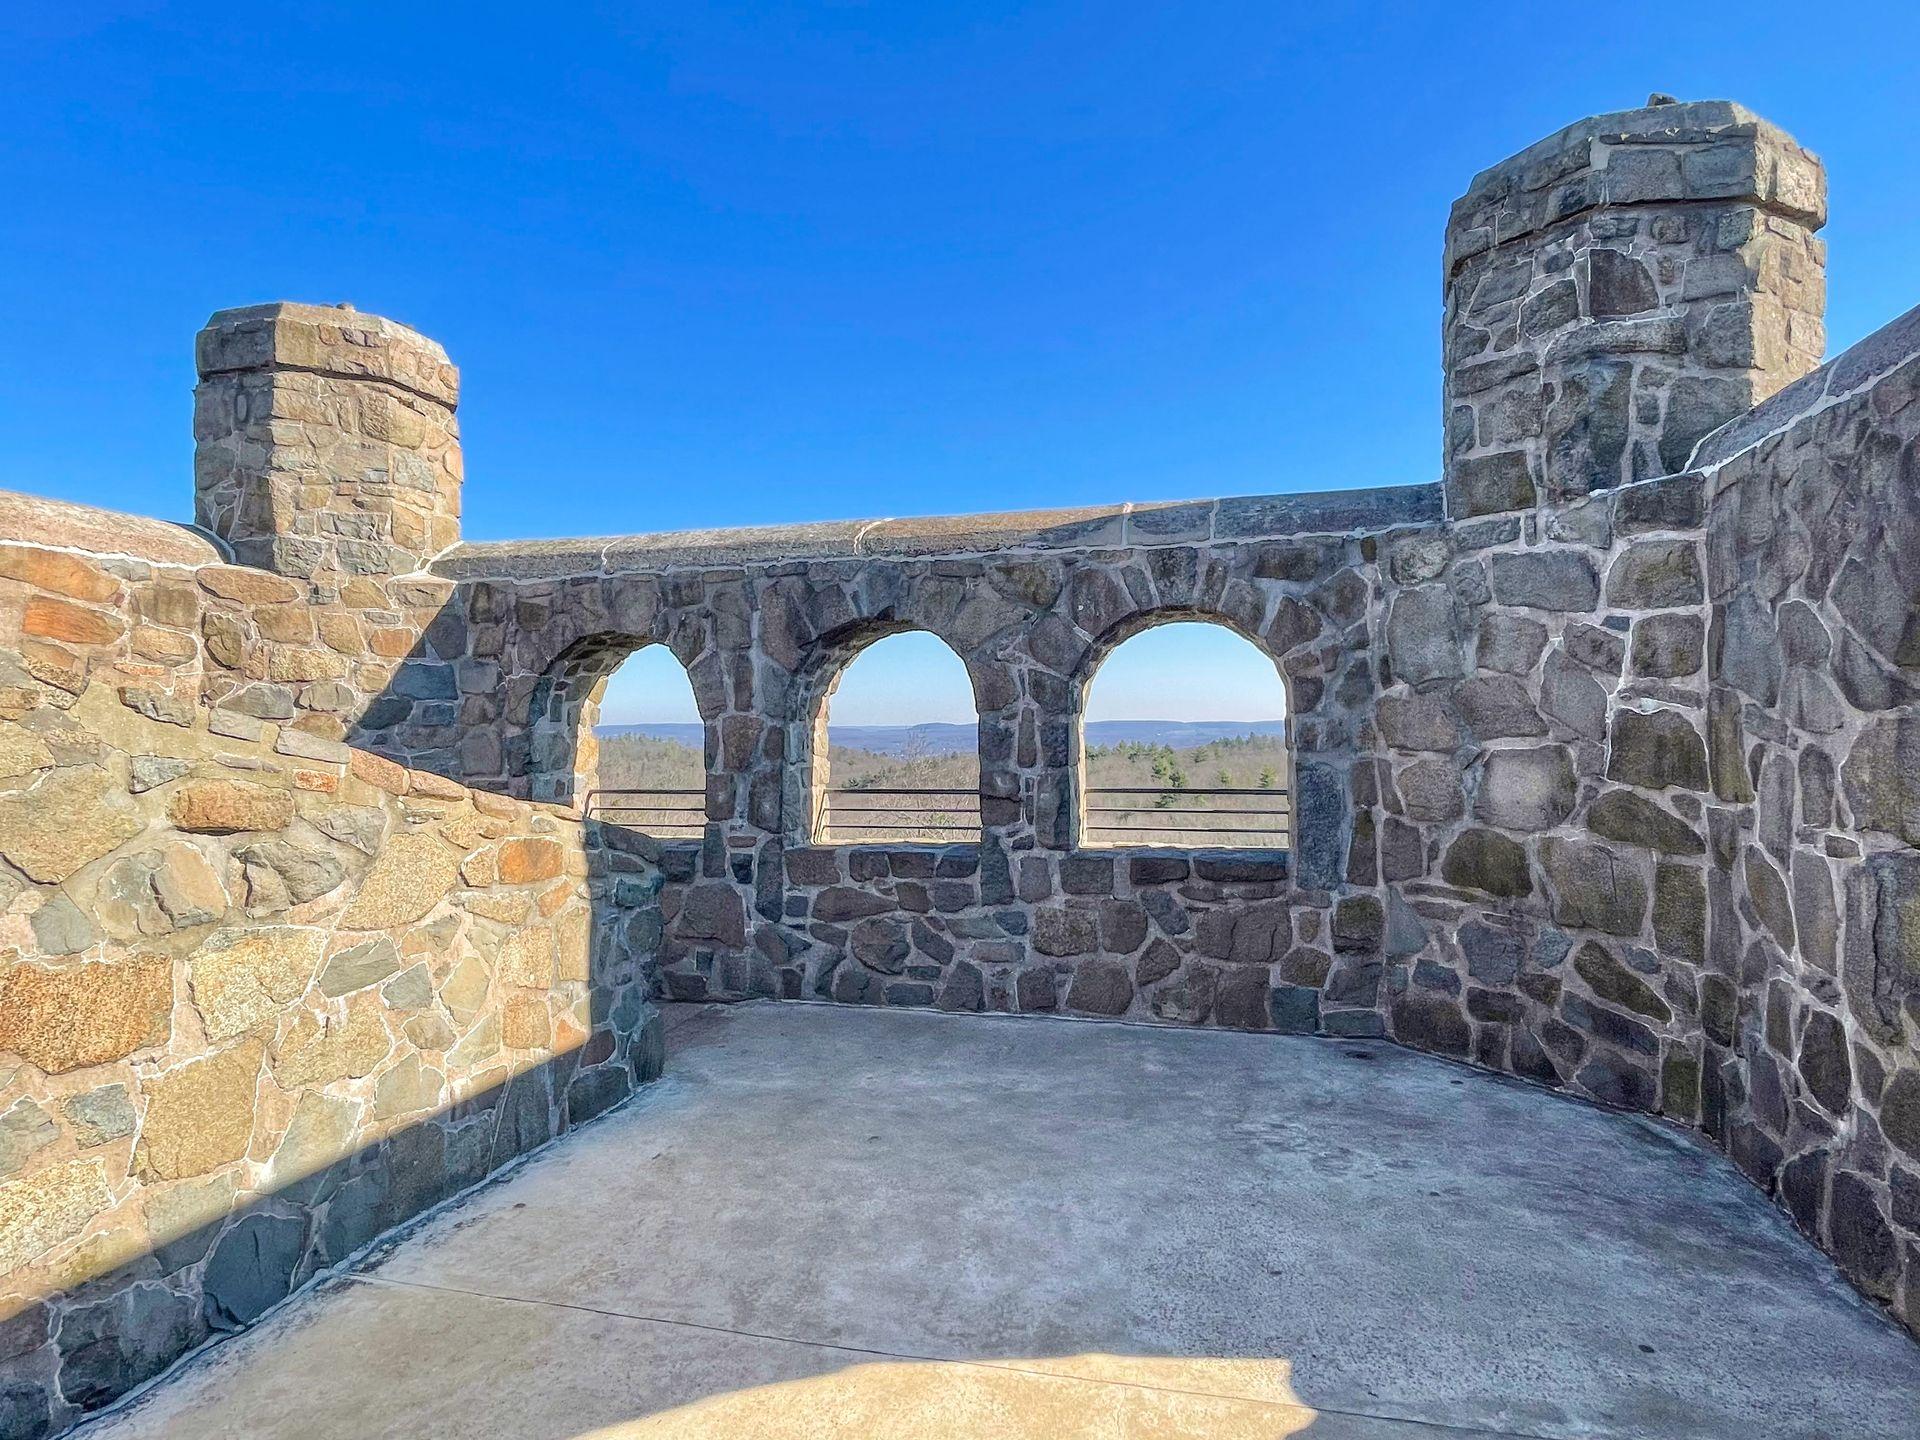 Inside the top of the tower at Sleeping Giant State Park. The building is made of stone and there are 3 windows that show a view of the area.